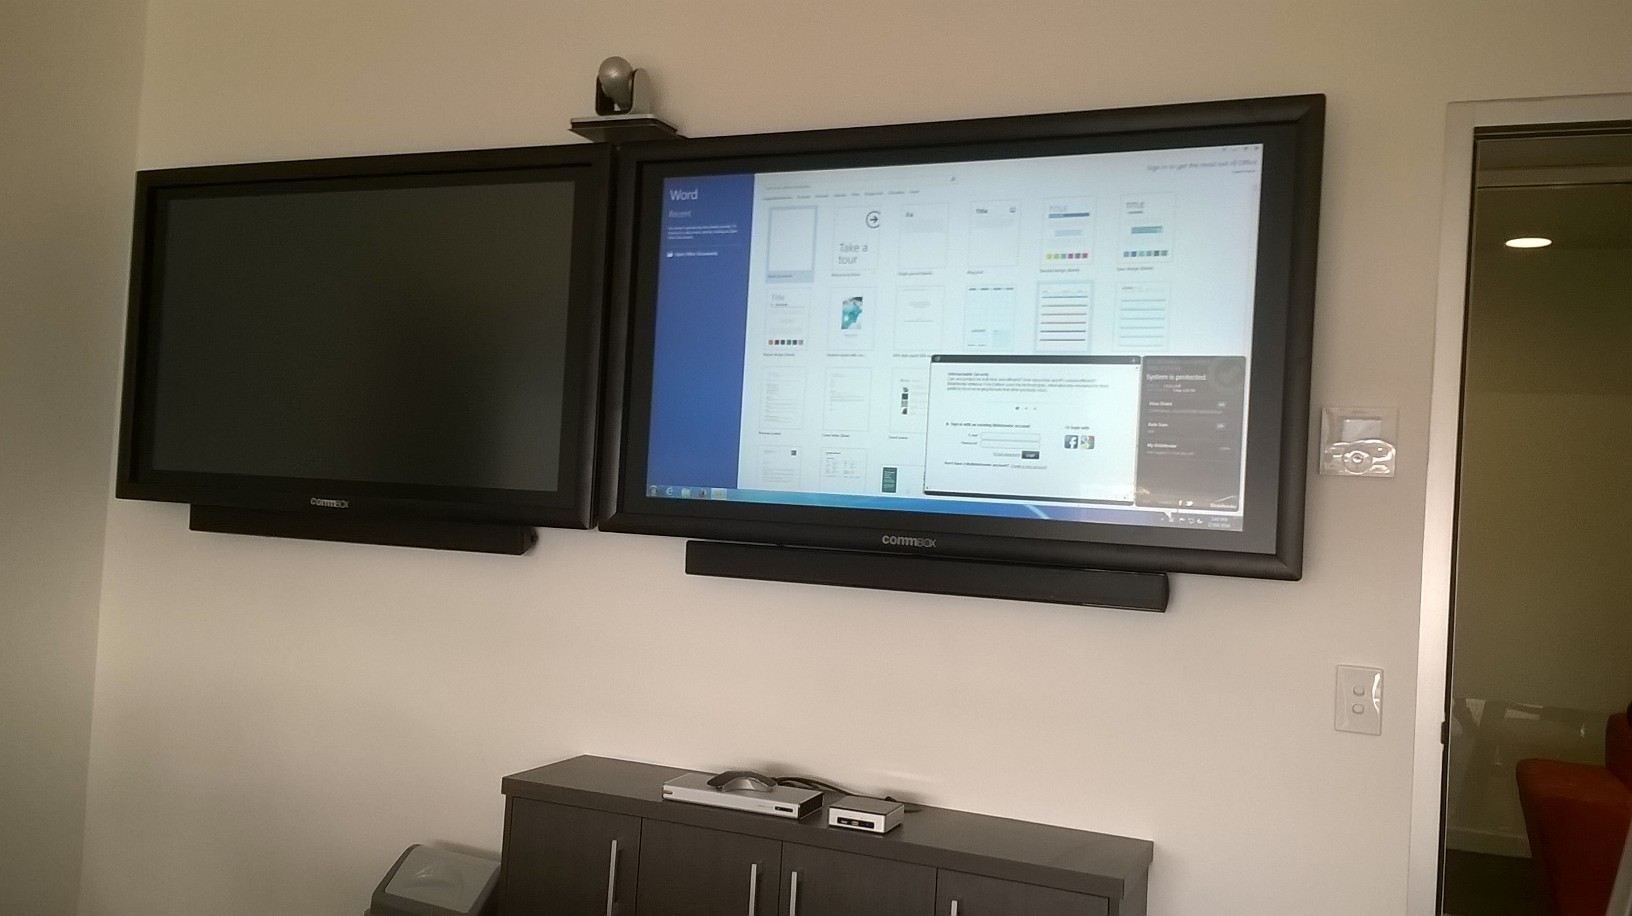 Polycom Video Conferncing and Commbox Touchscreen Installation in Cairns